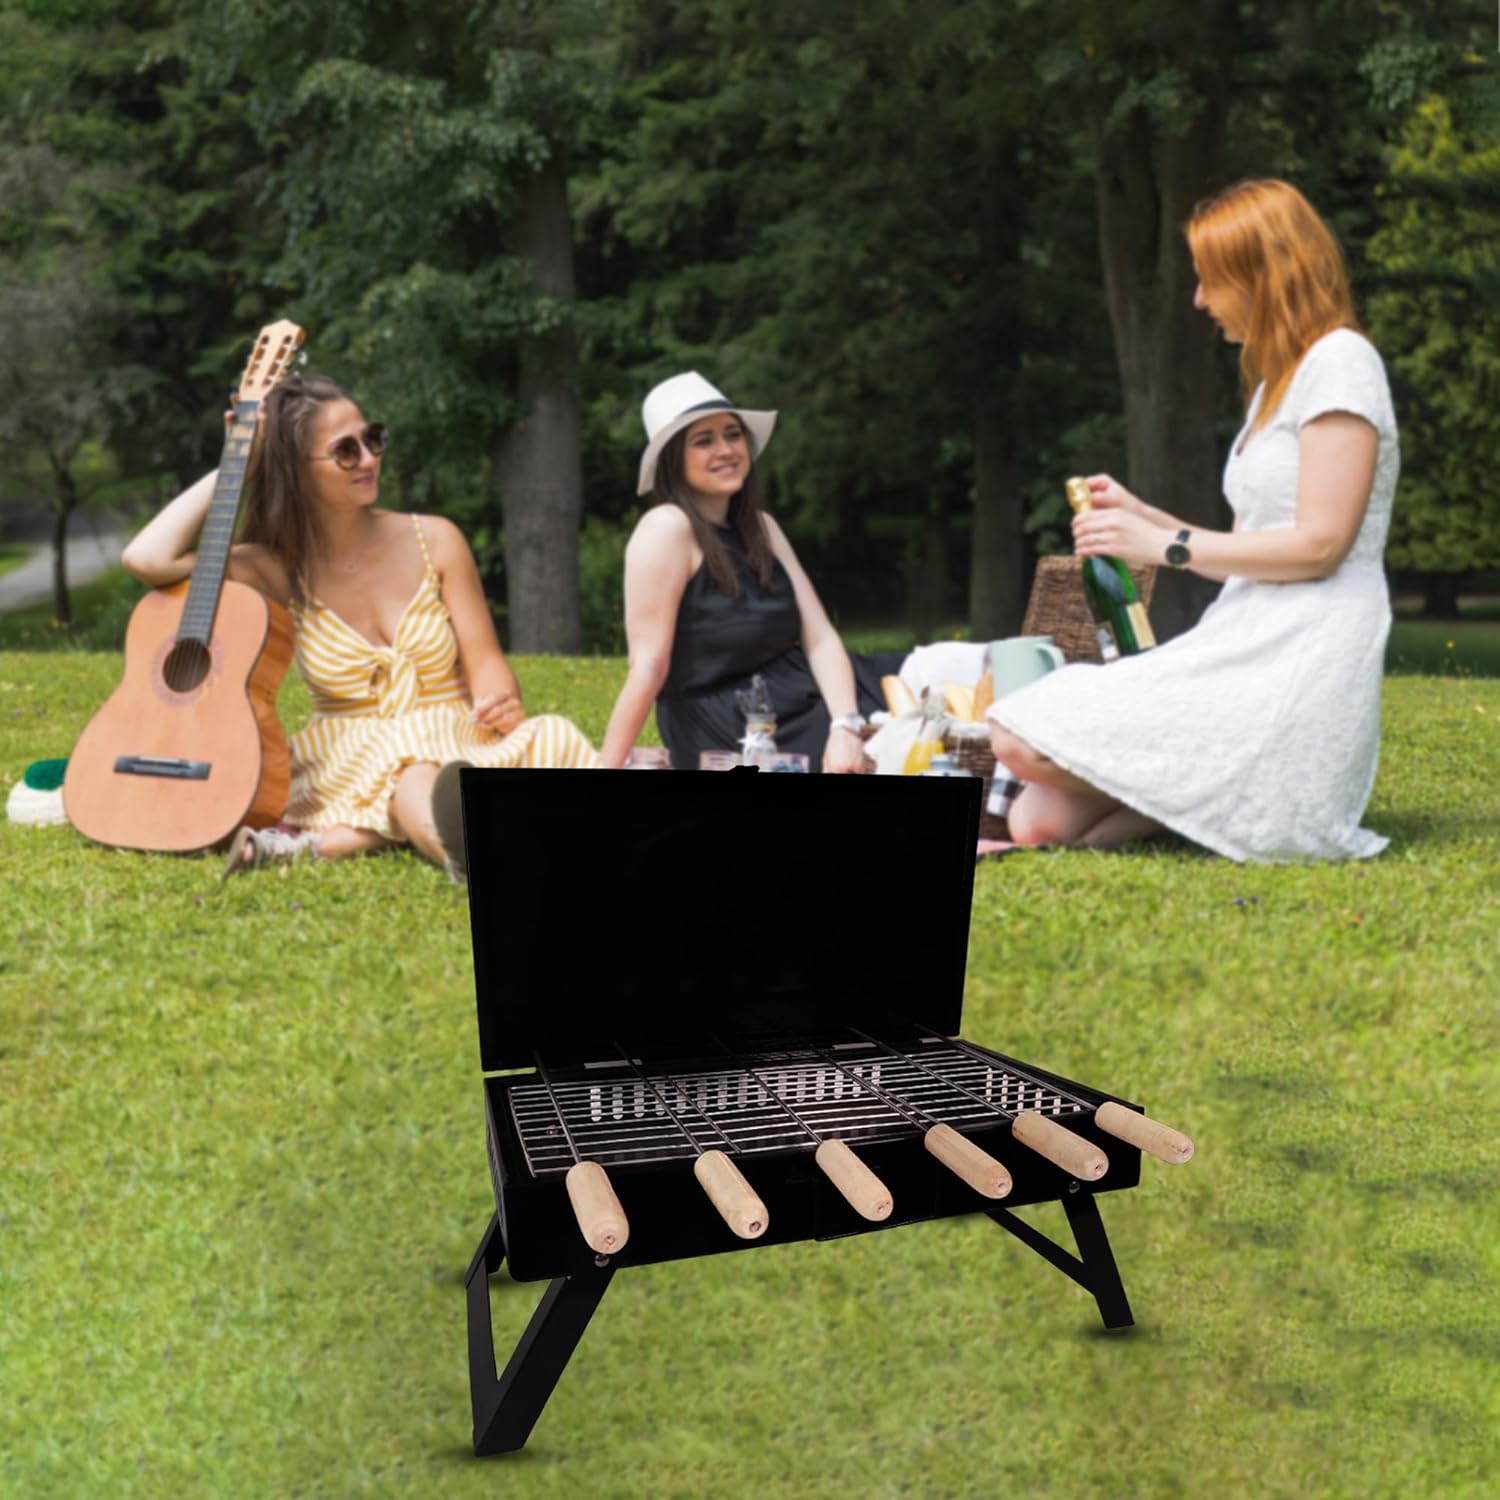 GrillPorter Briefcase Barbeque with Lid grill set | Charcoal Griller BBQ With 6 Skewers & 1 Tong